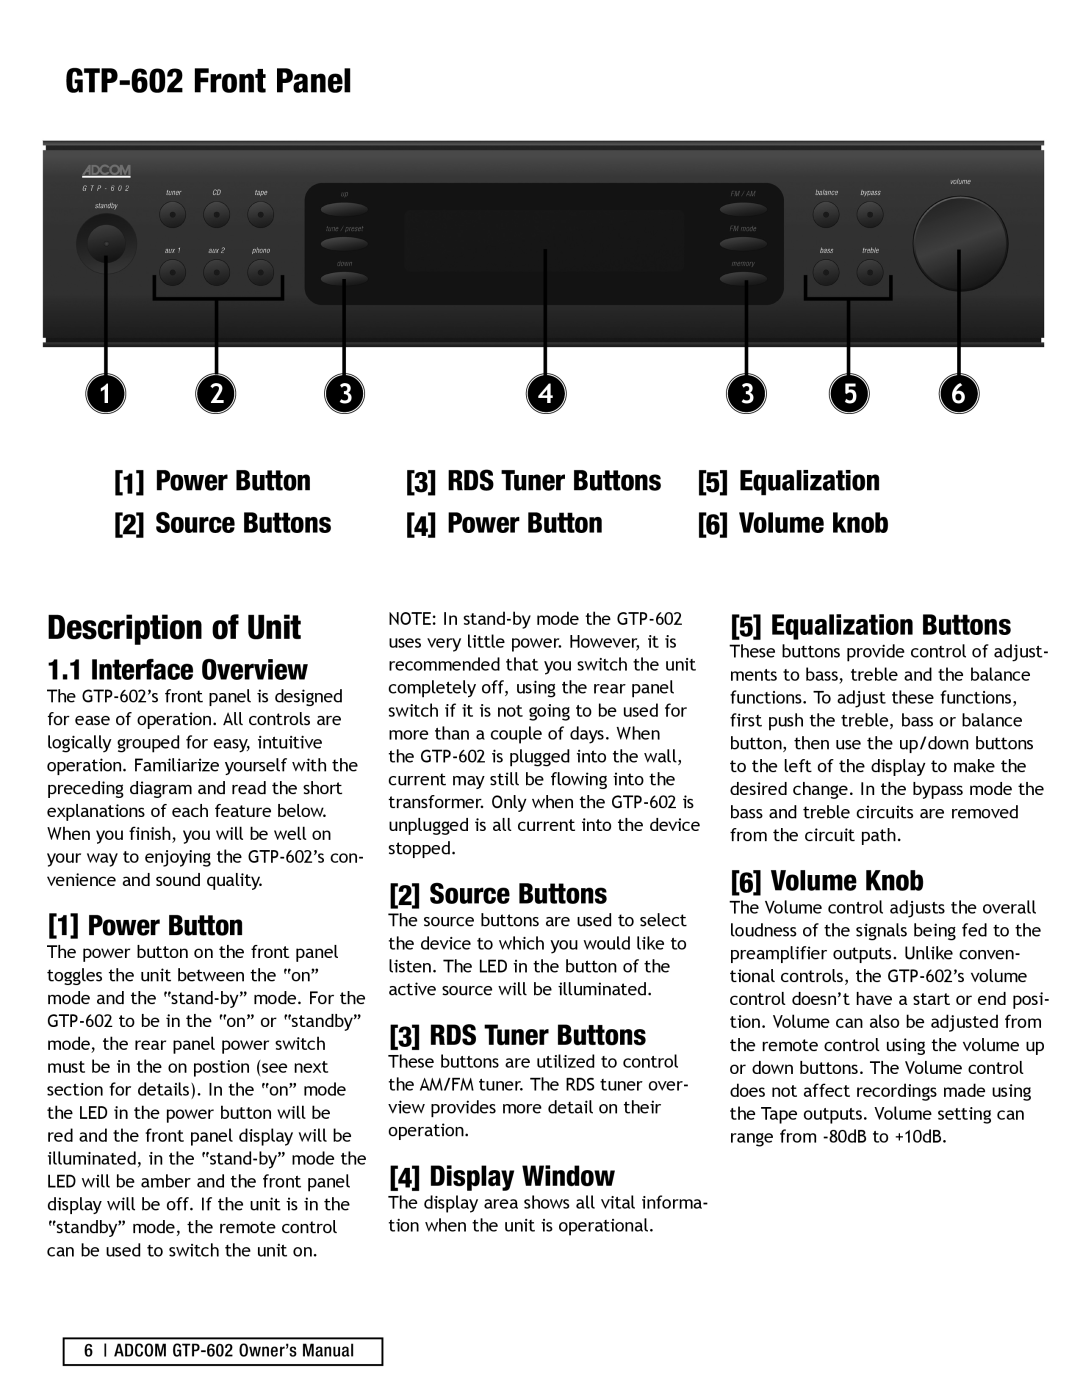 Adcom GTP-602Front Panel, Description of Unit, Interface Overview, Power Button, Source Buttons, RDS Tuner Buttons 